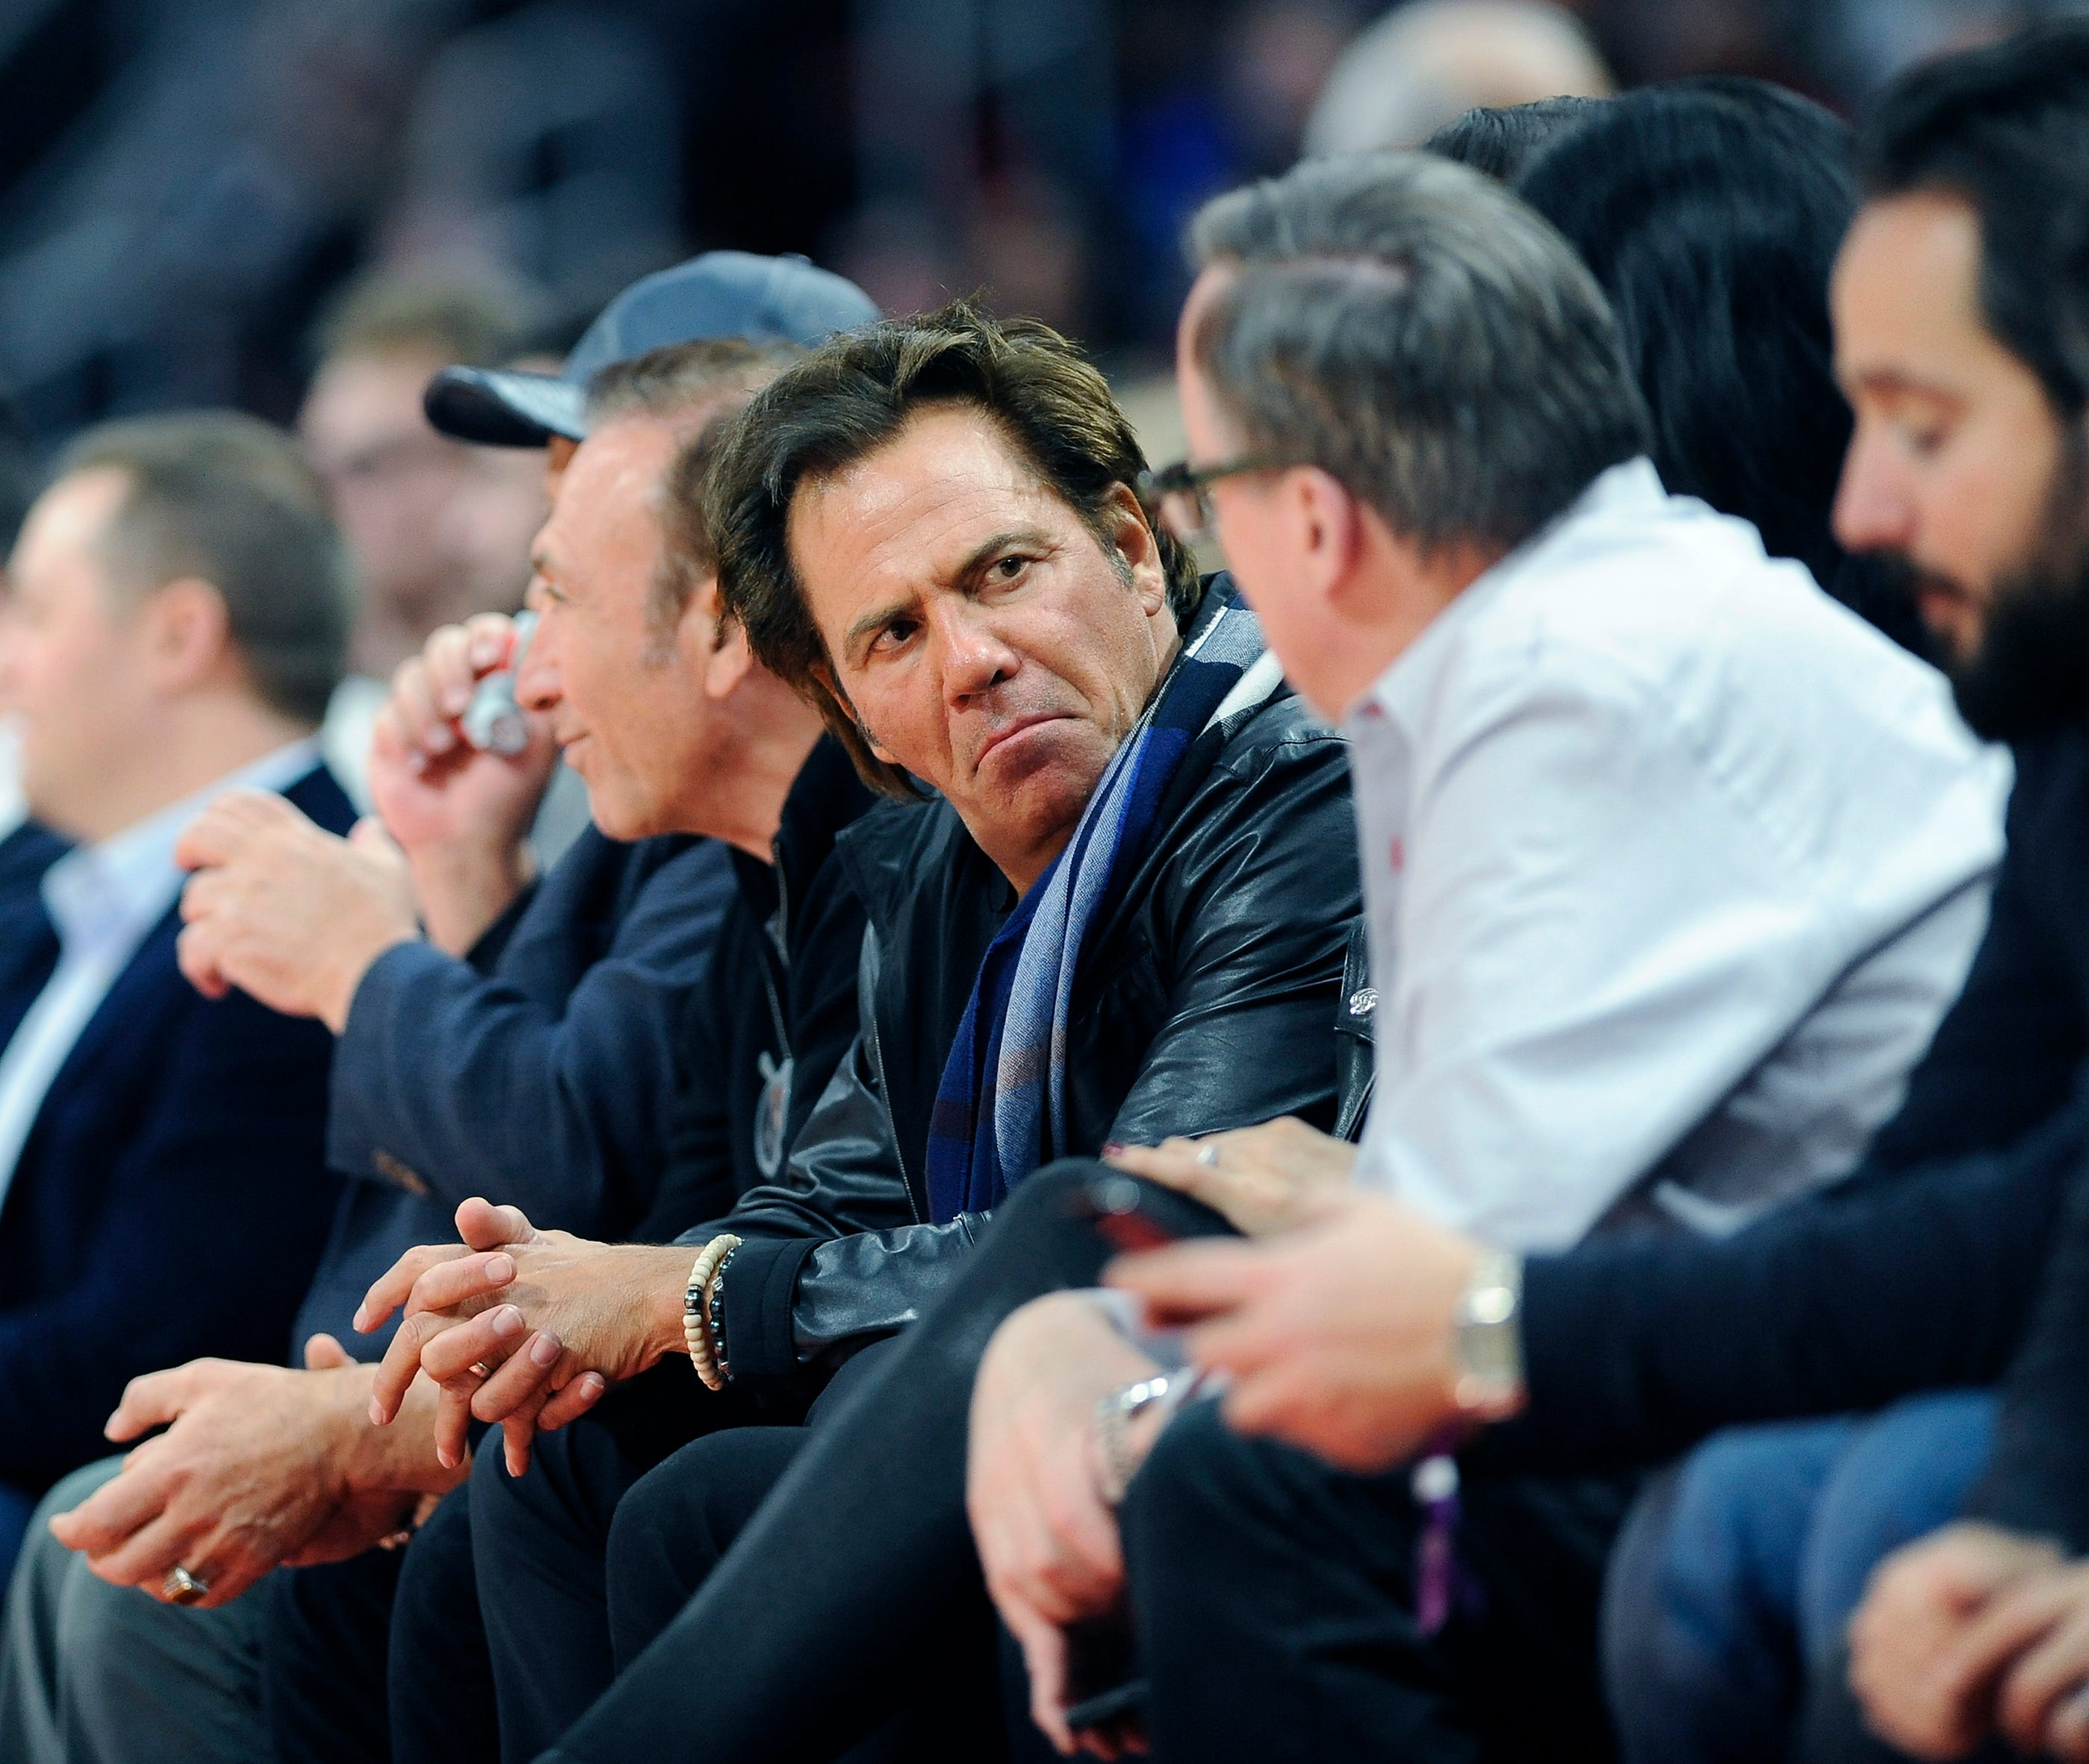 Pistons ' owner Tom Gores chat with a fan in the first quarter at Little Caesars Arena on Tuesday, January 29, 2019.